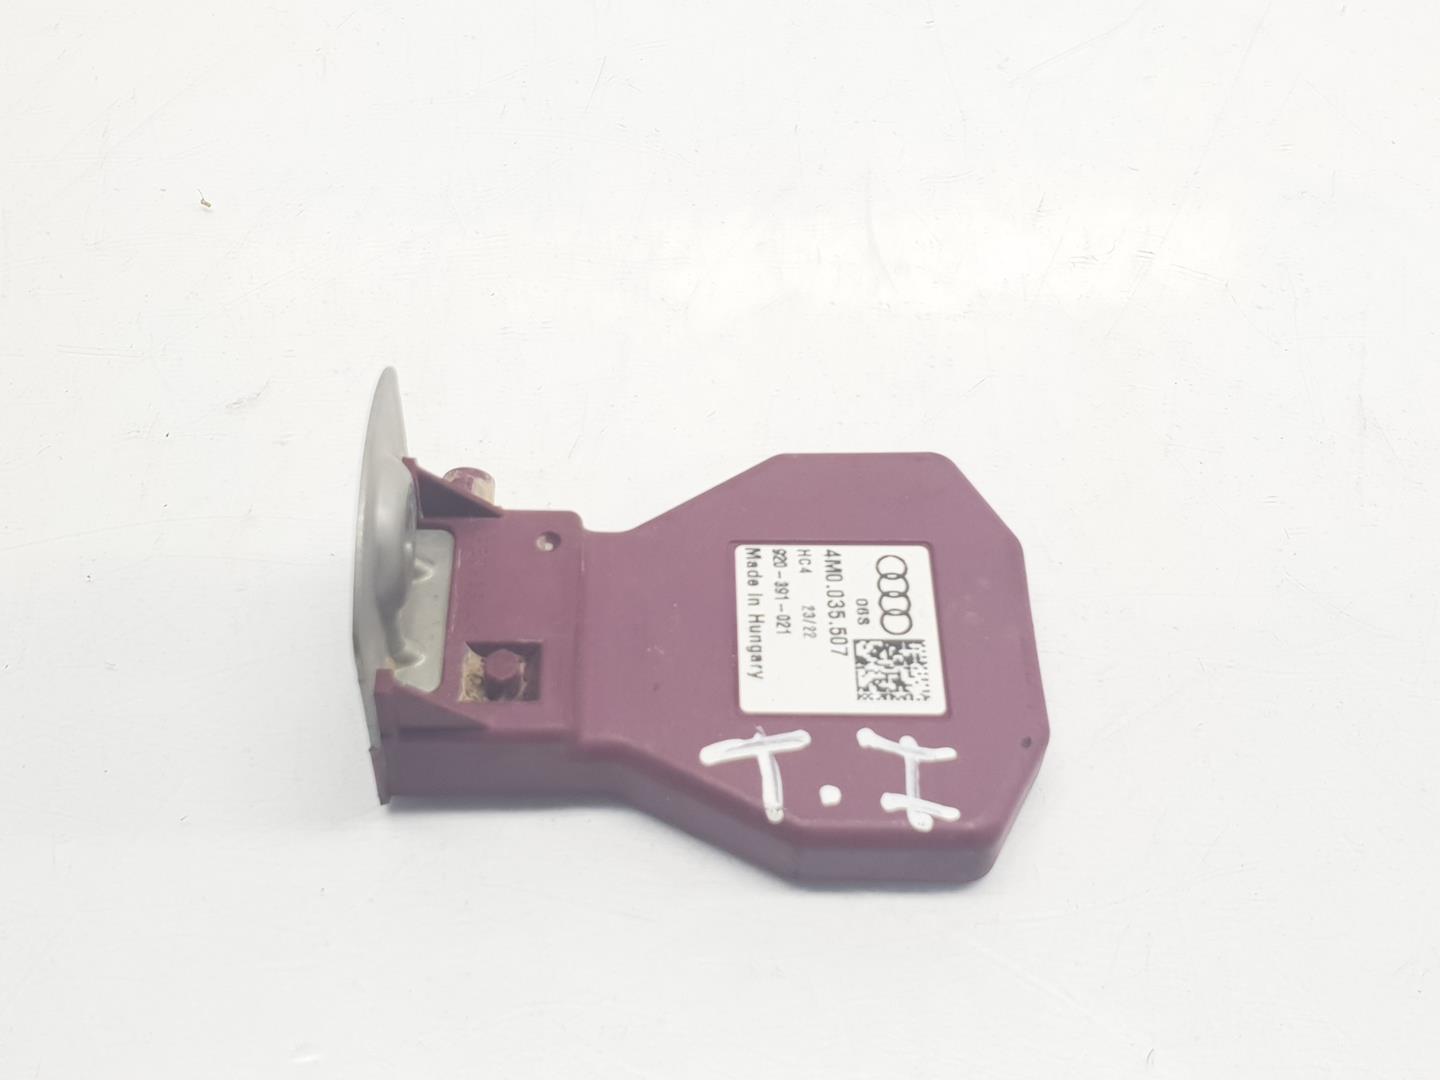 SEAT Alhambra 2 generation (2010-2021) Other Control Units 4M0035507, 4M0035507 24239036